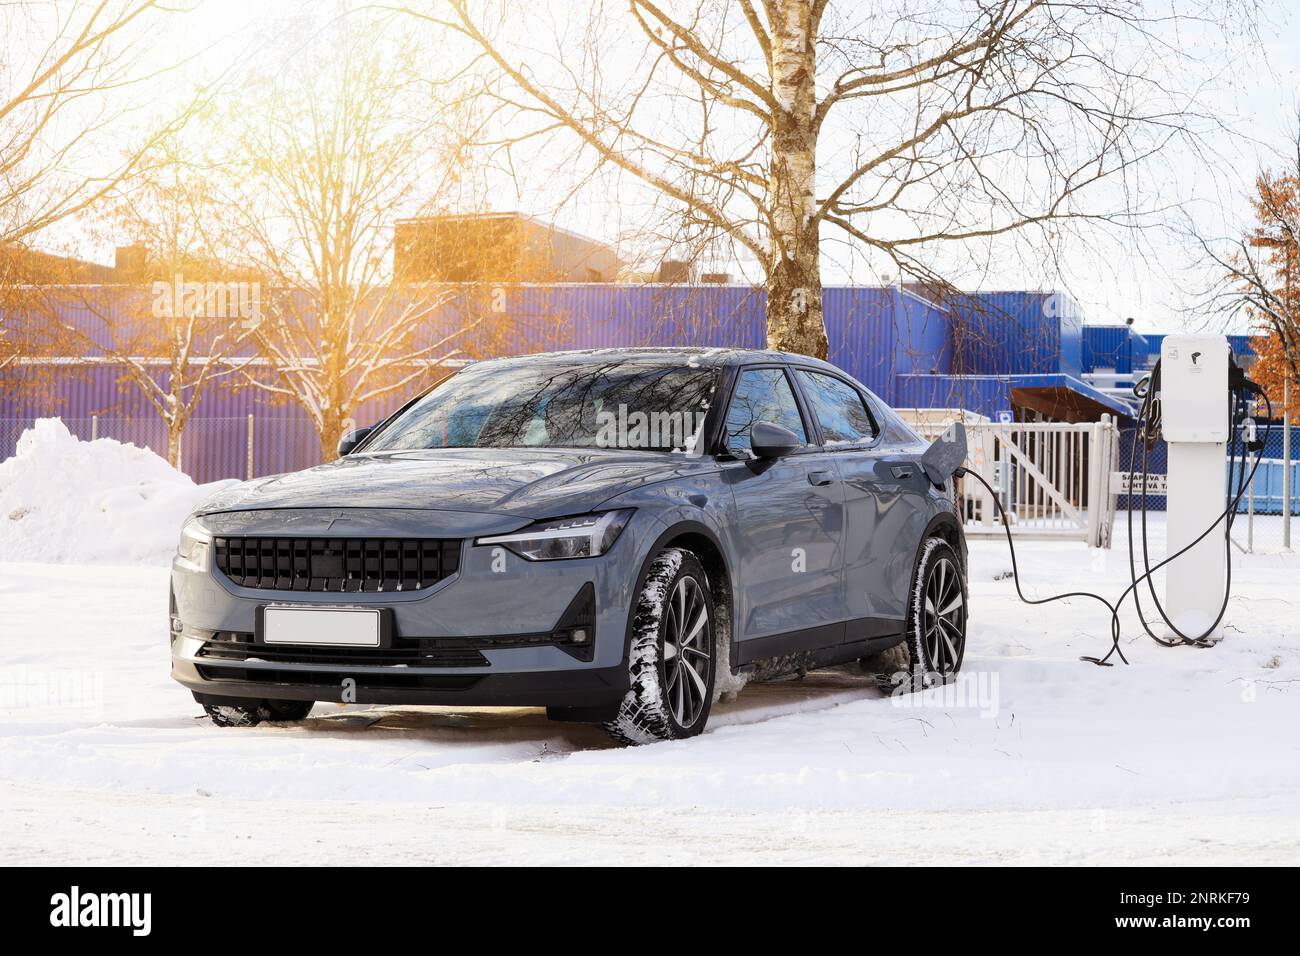 Polestar 2 electric car charging battery. The Polestar 2 (2020-) is a battery electric 5-door liftback produced by Volvo under its Polestar sub-brand. Stock Photo